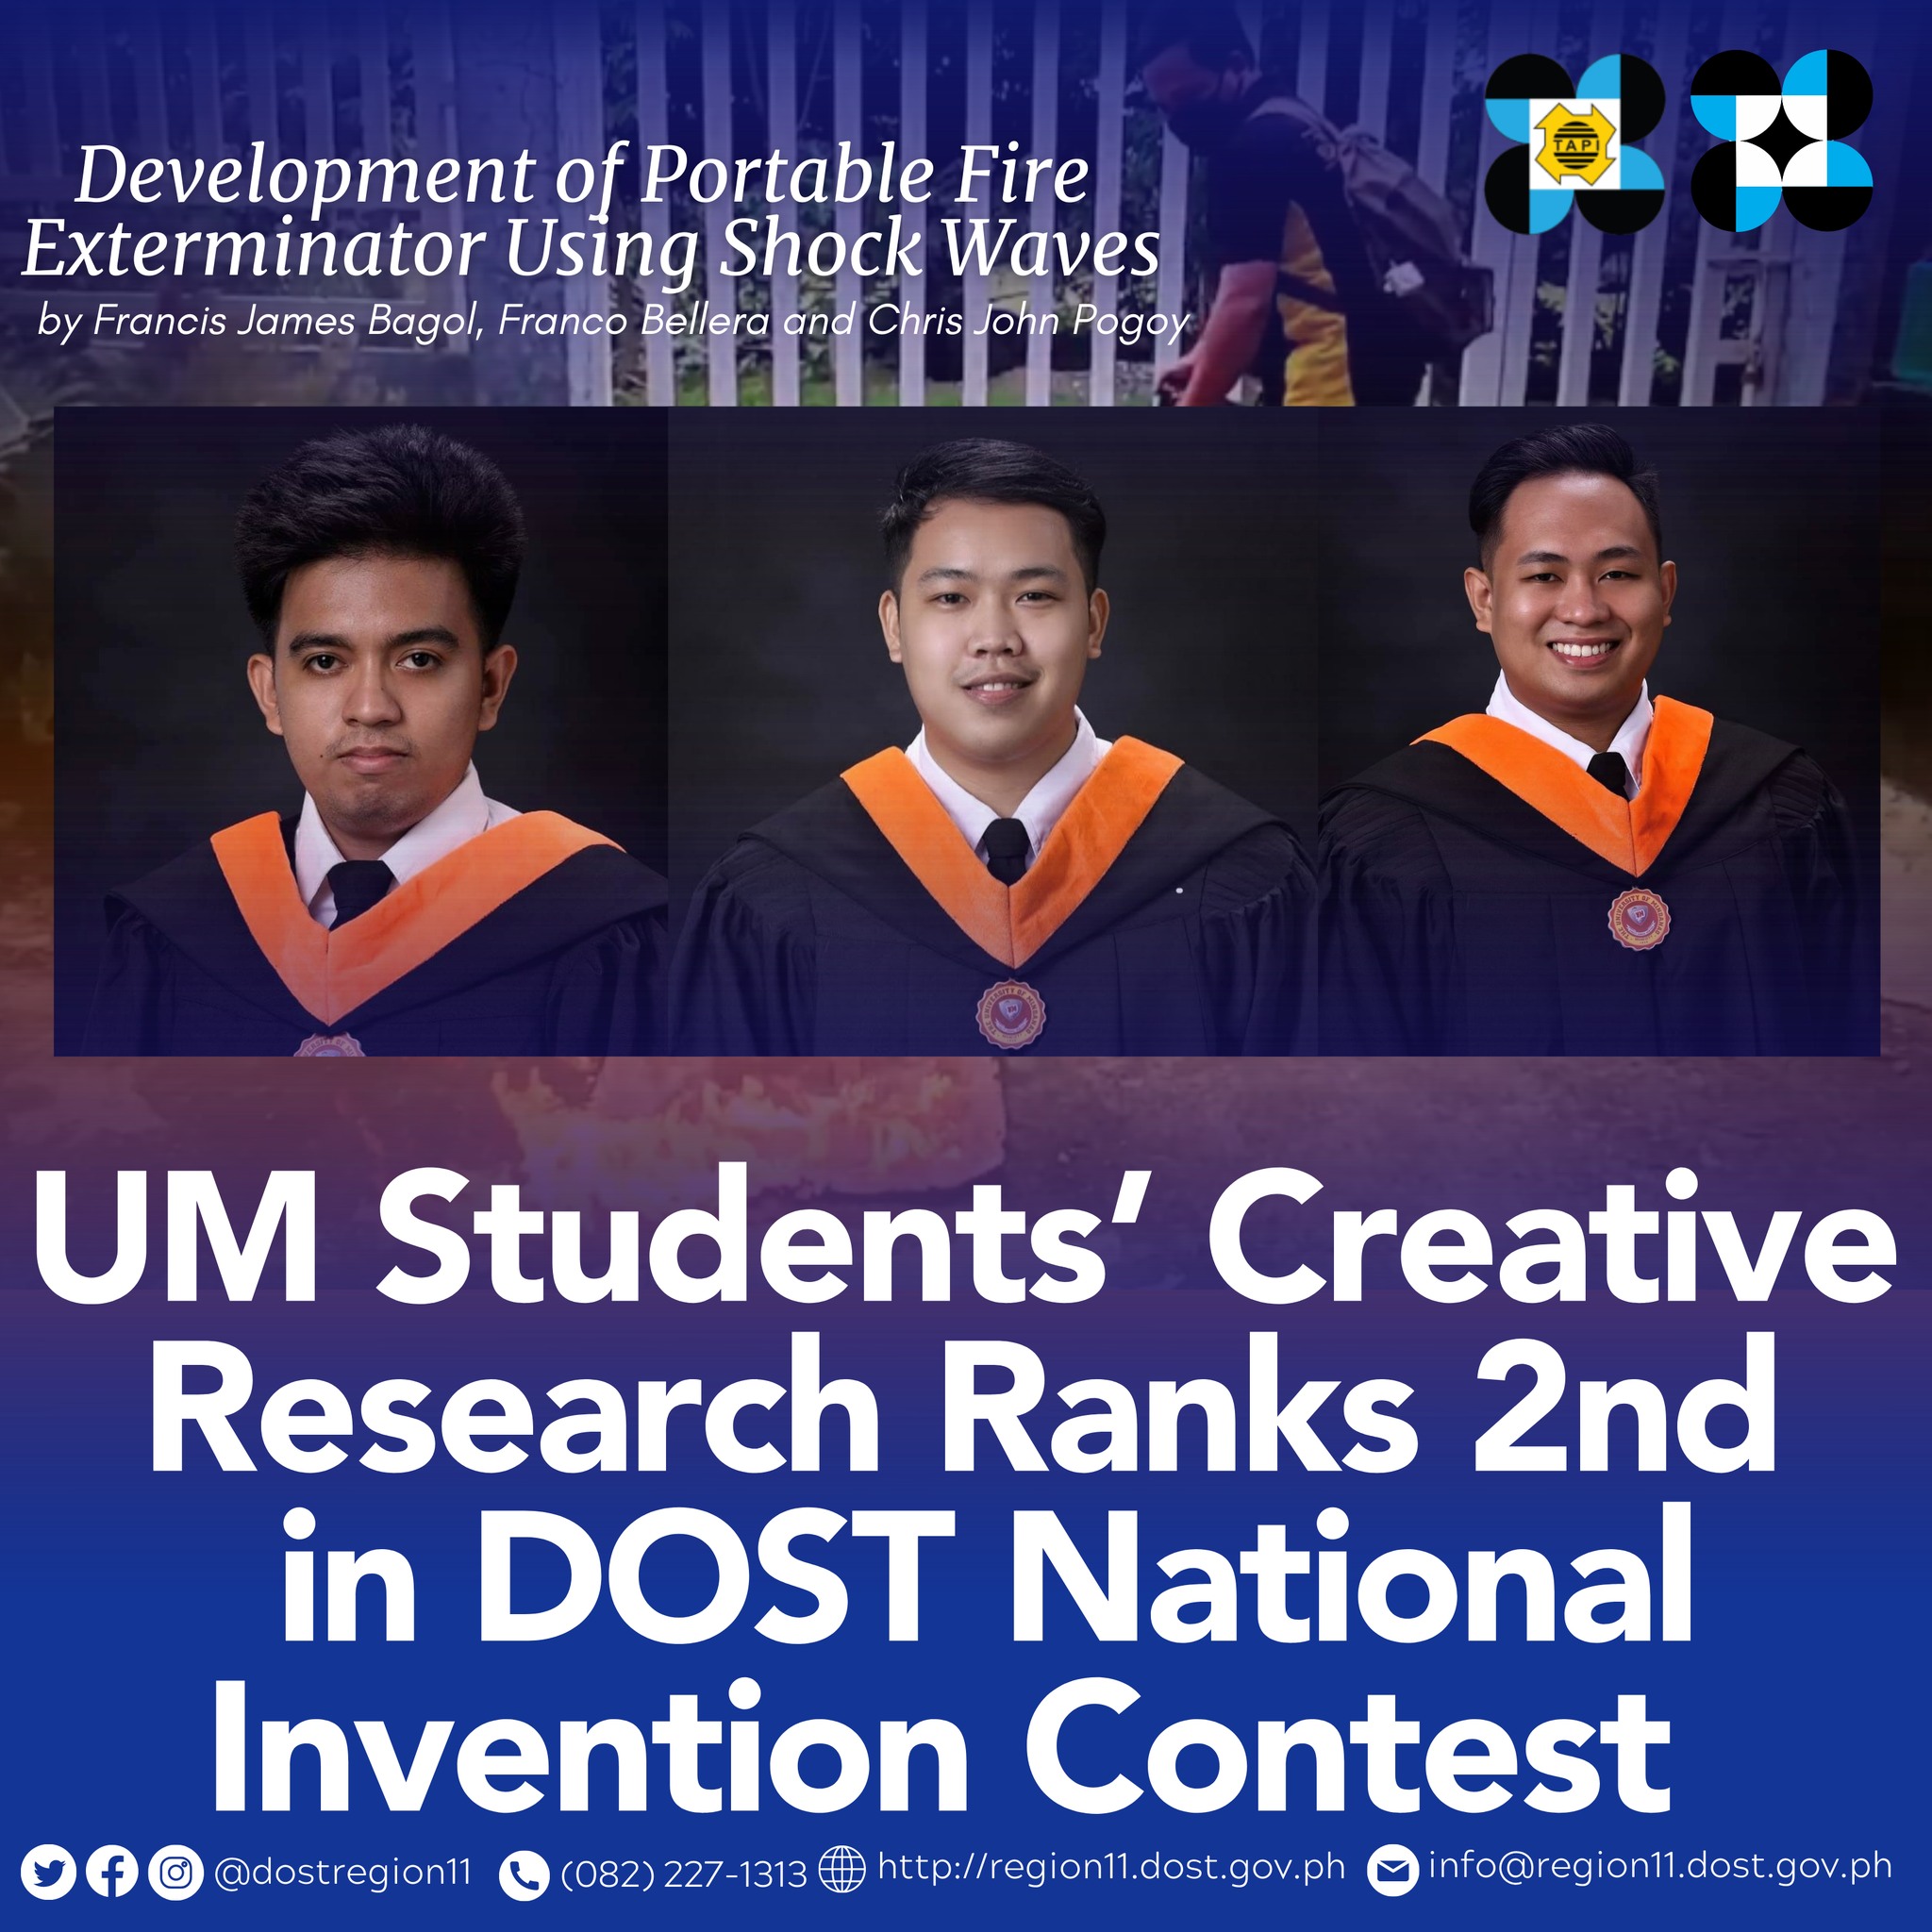 DOST recognizes UMians' Creative Research Project in DOST National Invention Contest